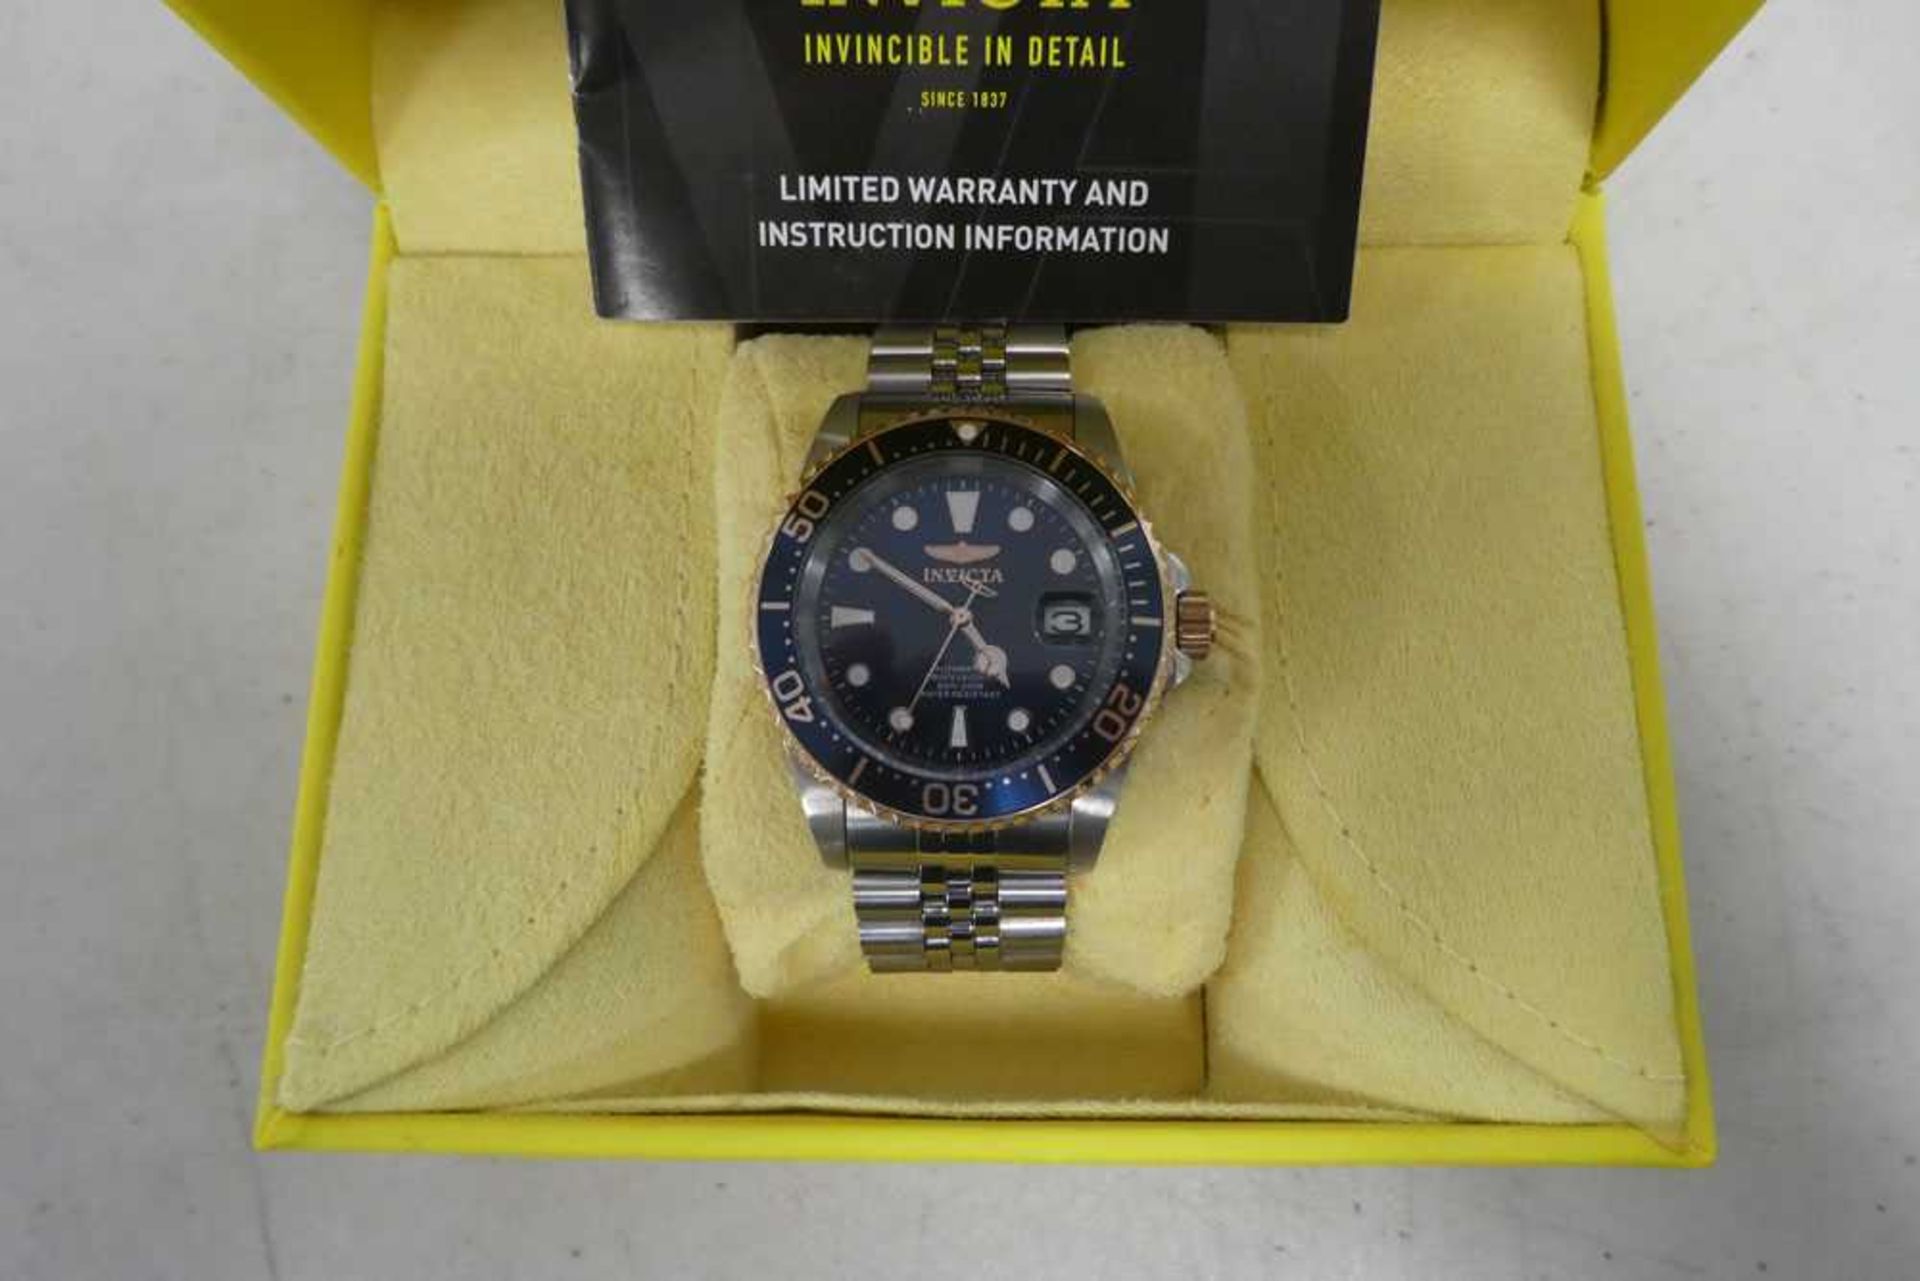 +VAT Gents Invicta wrist watch with box and instruction manual - Image 2 of 2